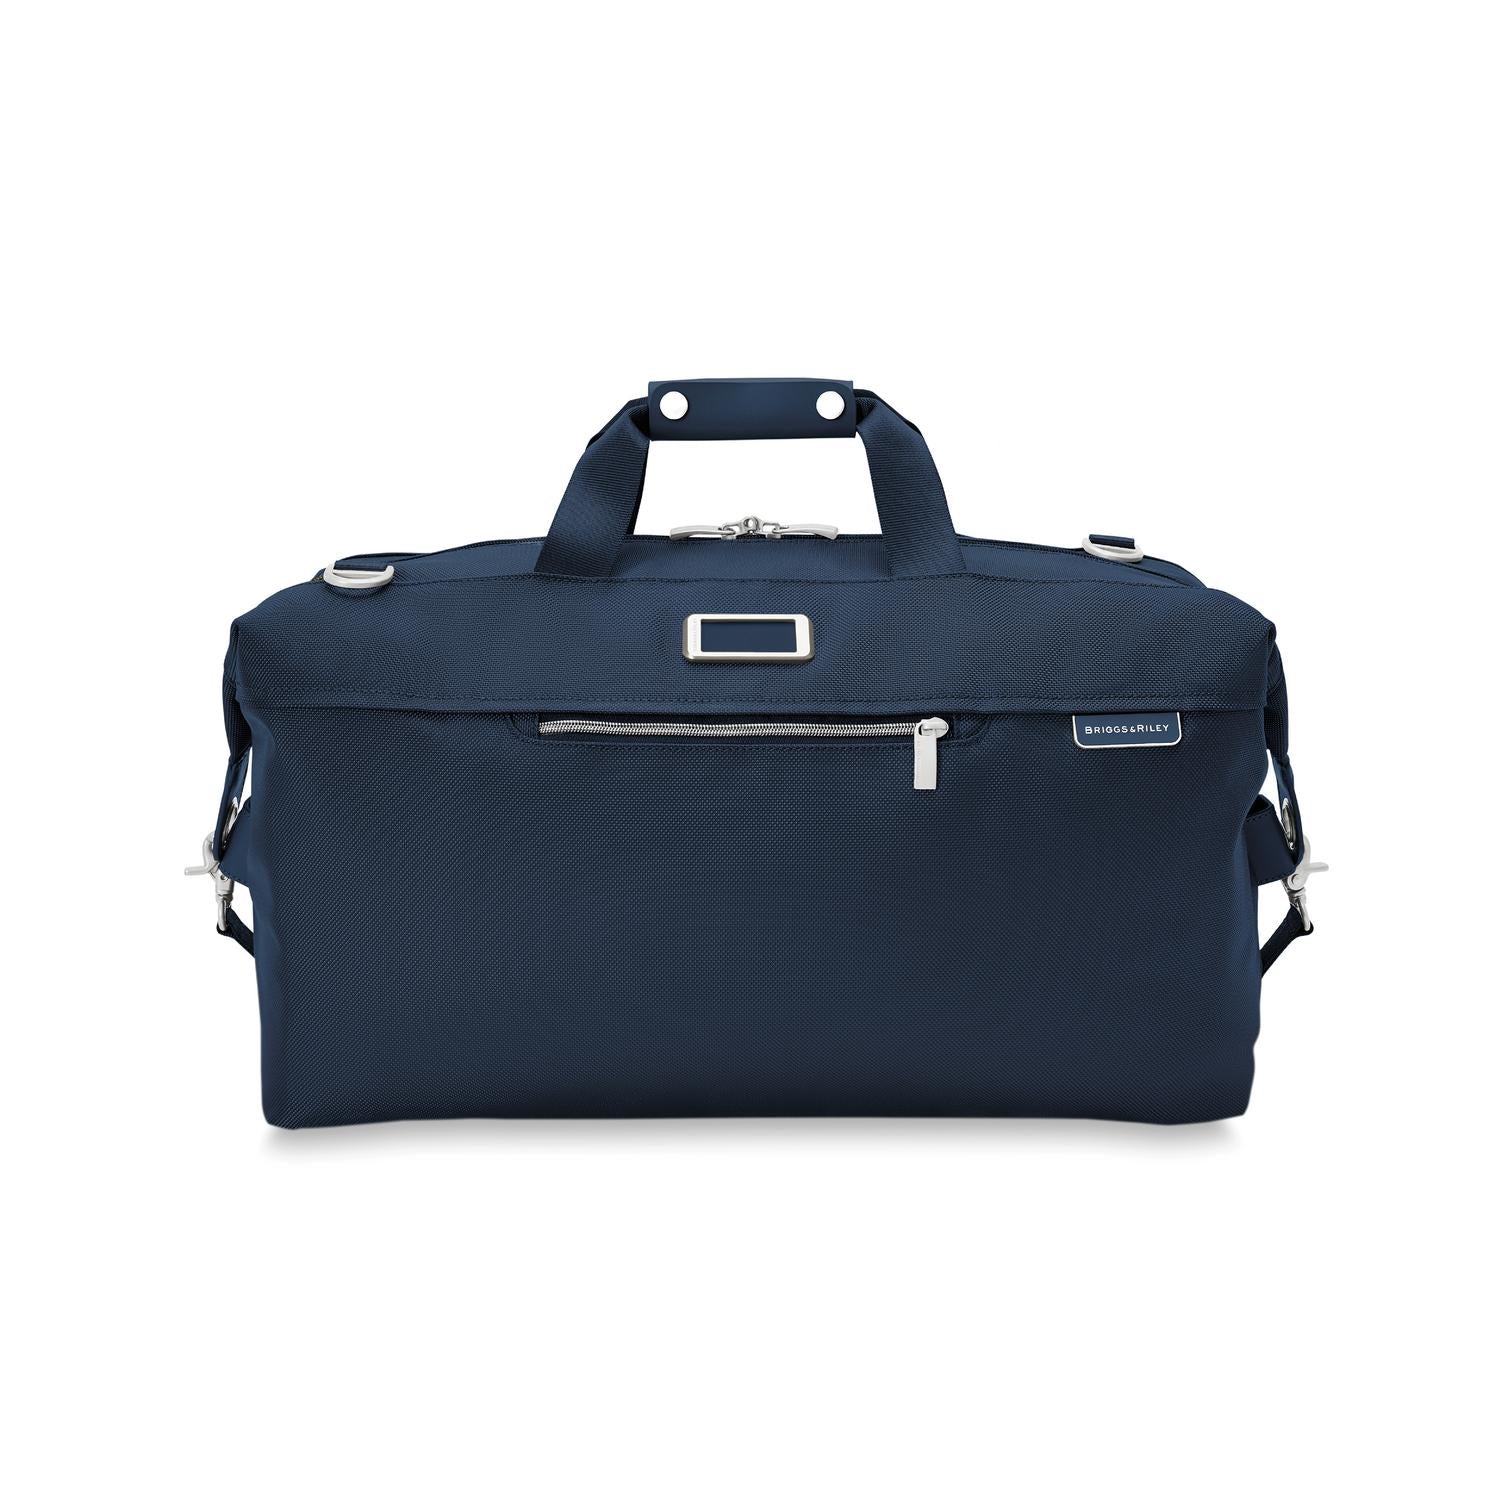 Briggs and Riley Weekender Duffle Navy front view